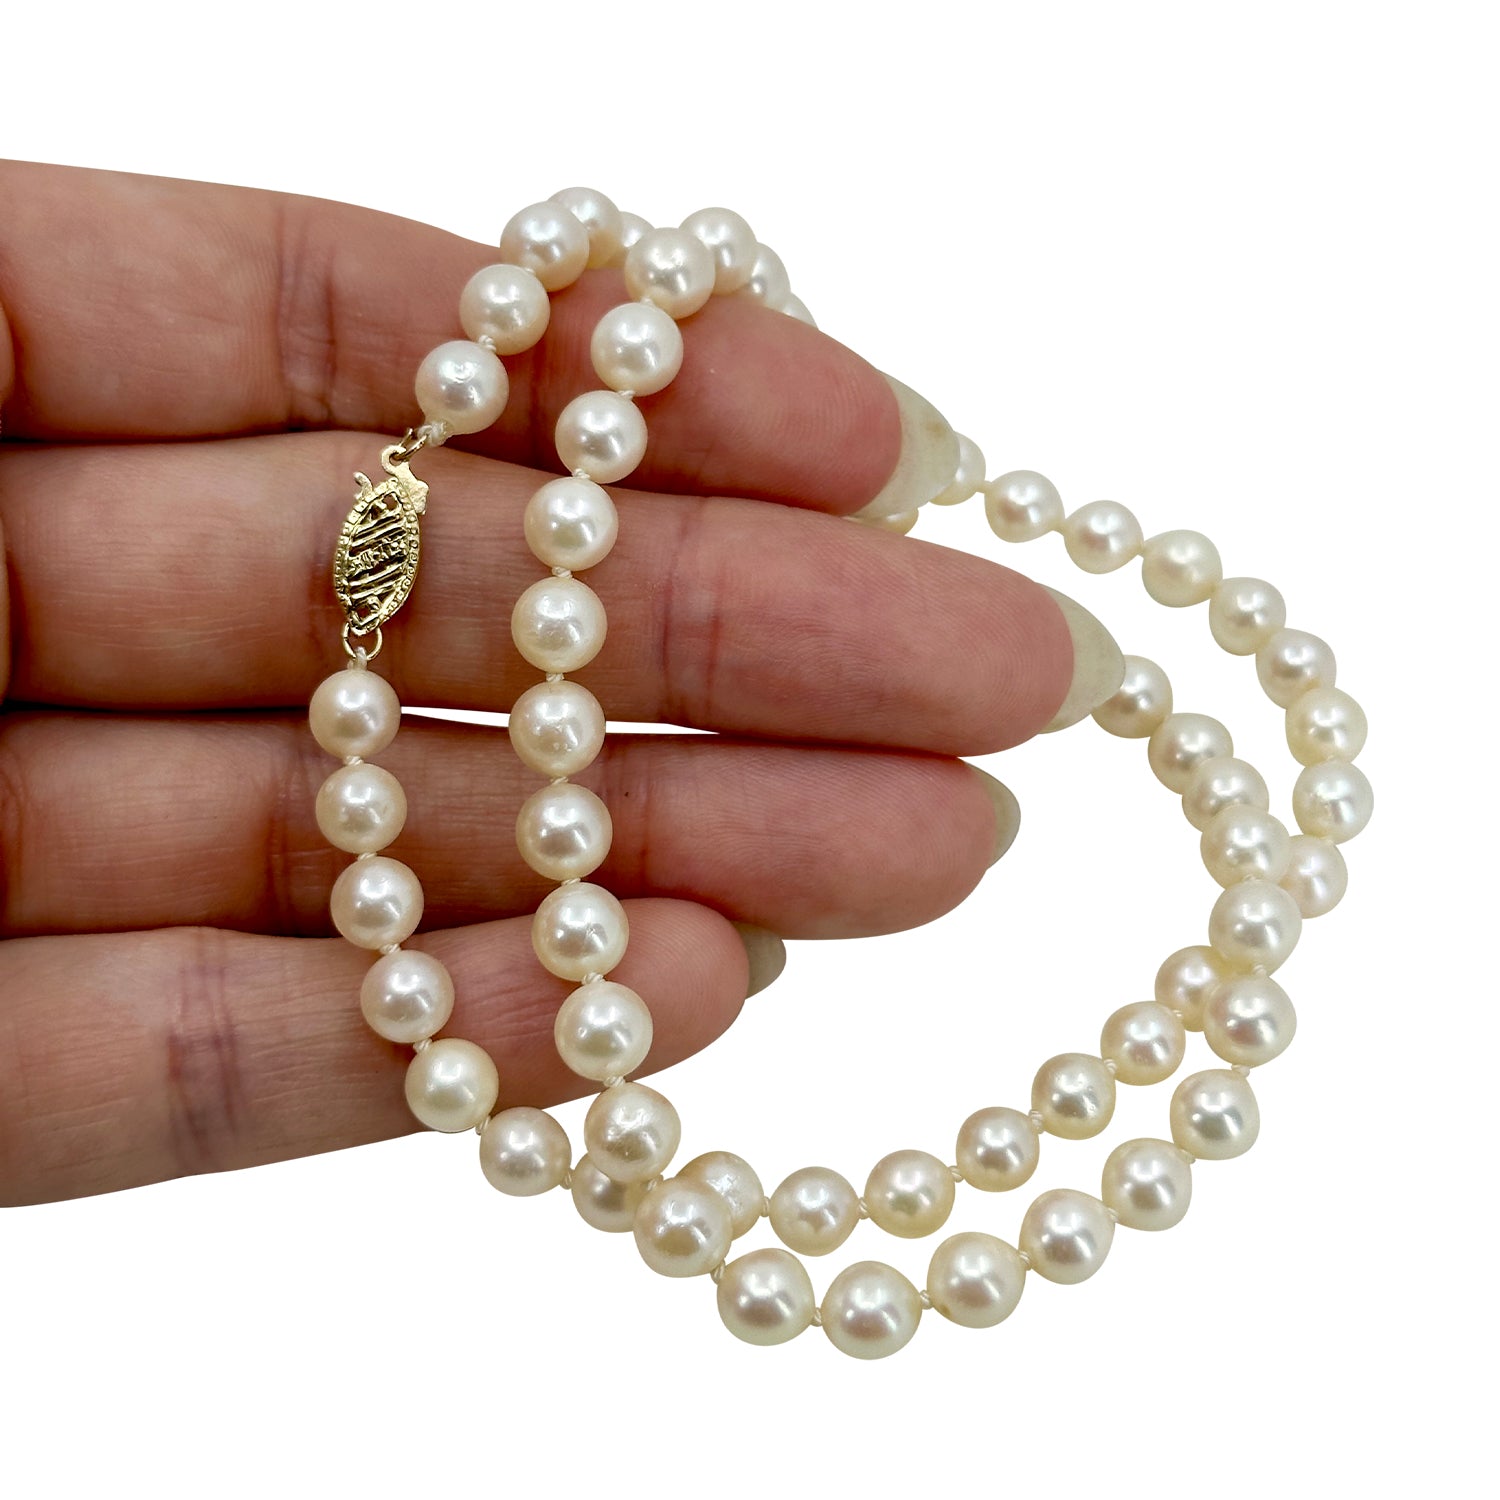 MCM Vintage Japanese Cultured Saltwater Akoya Pearl Necklace - 14K Yellow Gold 18.25 Inch